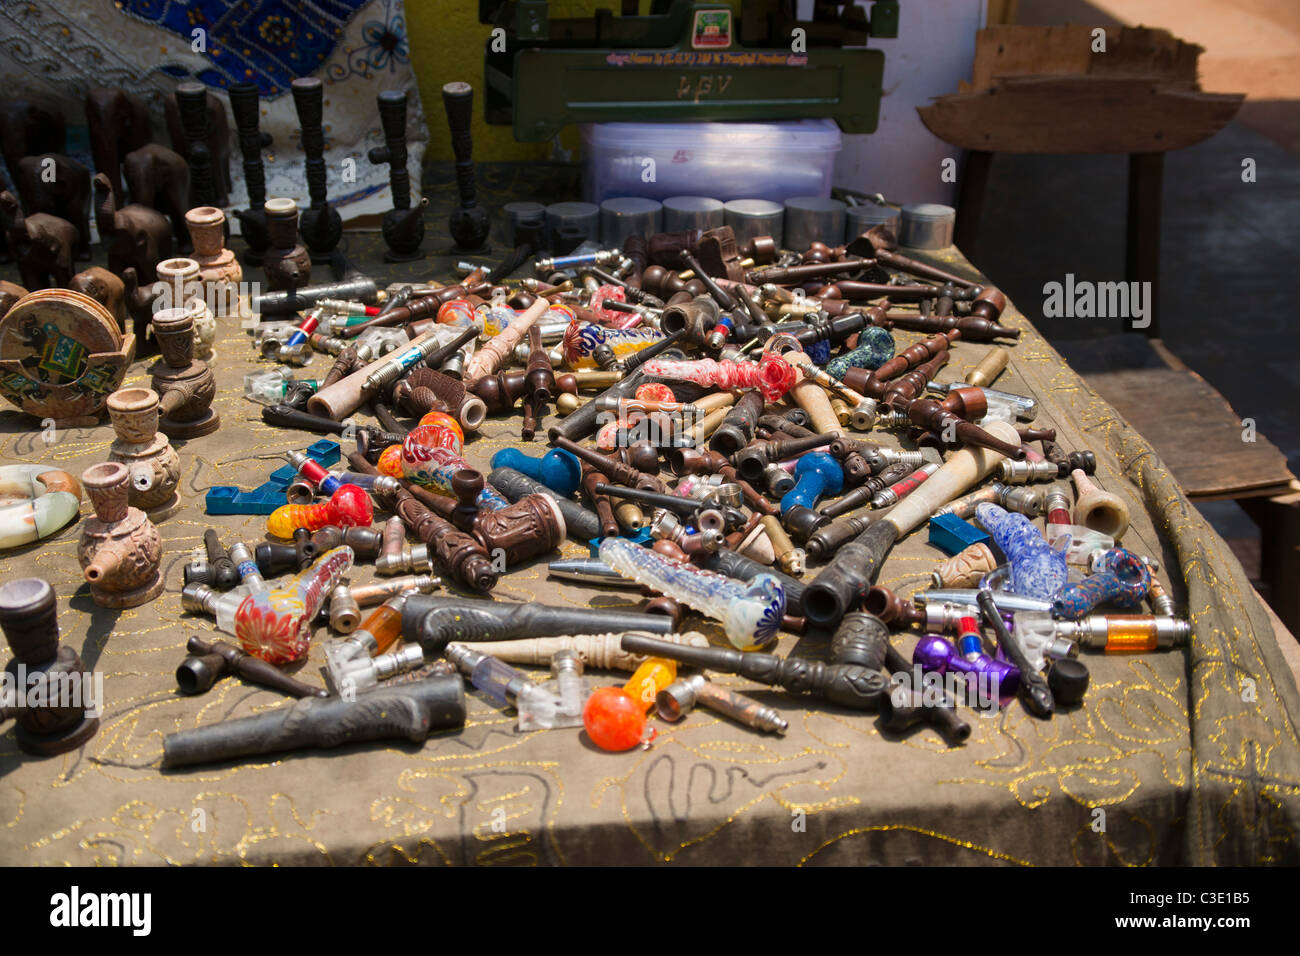 A quantity of pipe and hashish smoking paraphernalia on a market stall in Goa India. Stock Photo